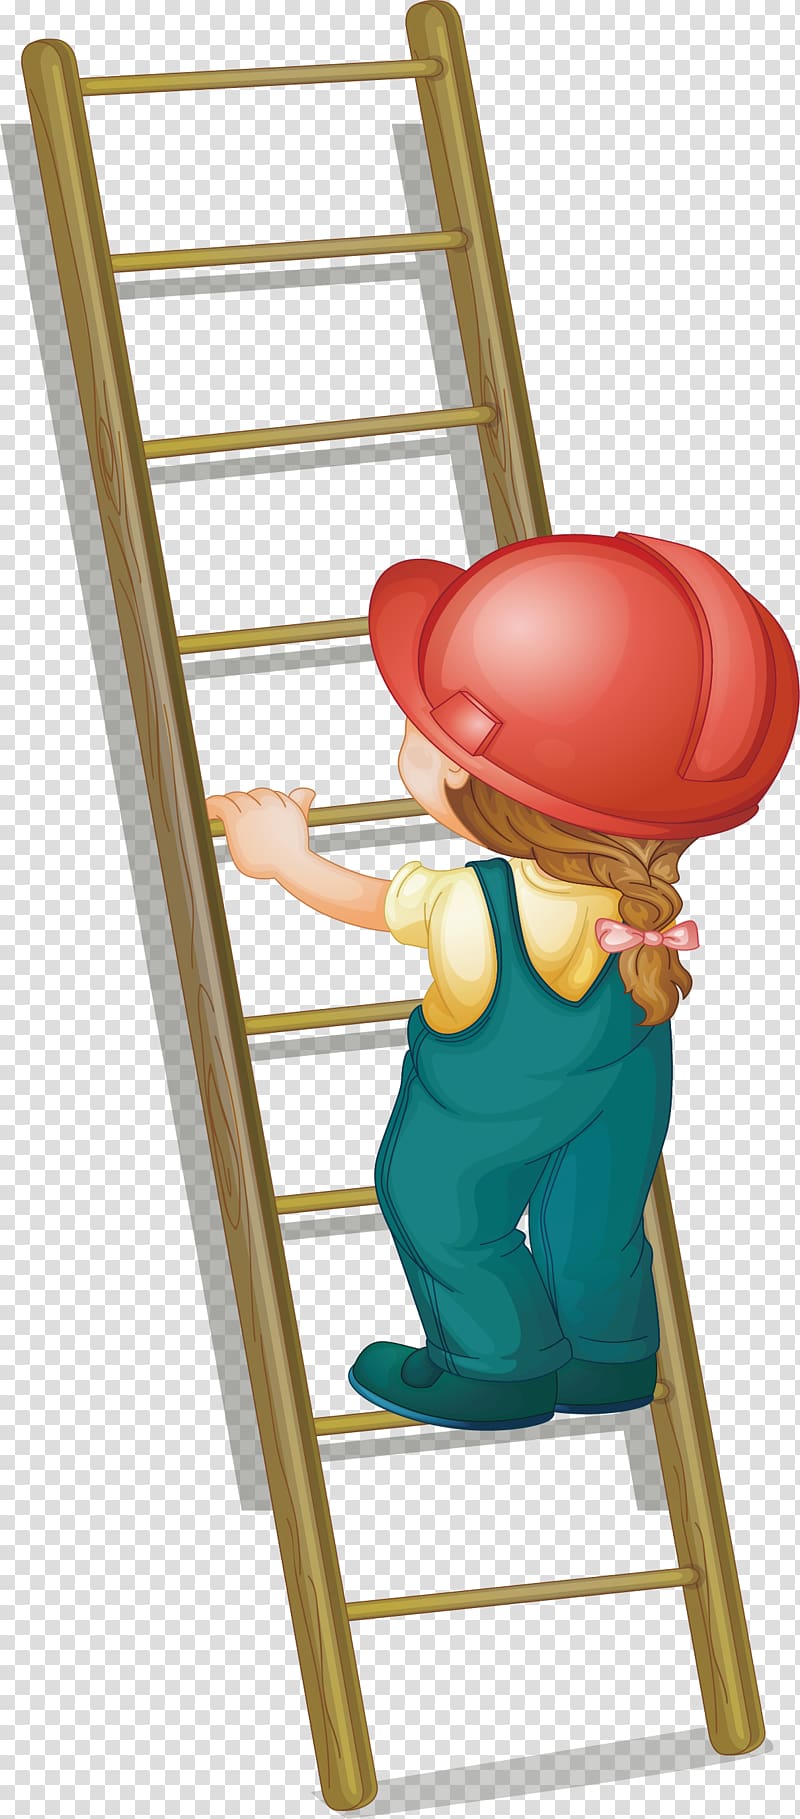 Ladder clipart boy pictures on Cliparts Pub 2022 